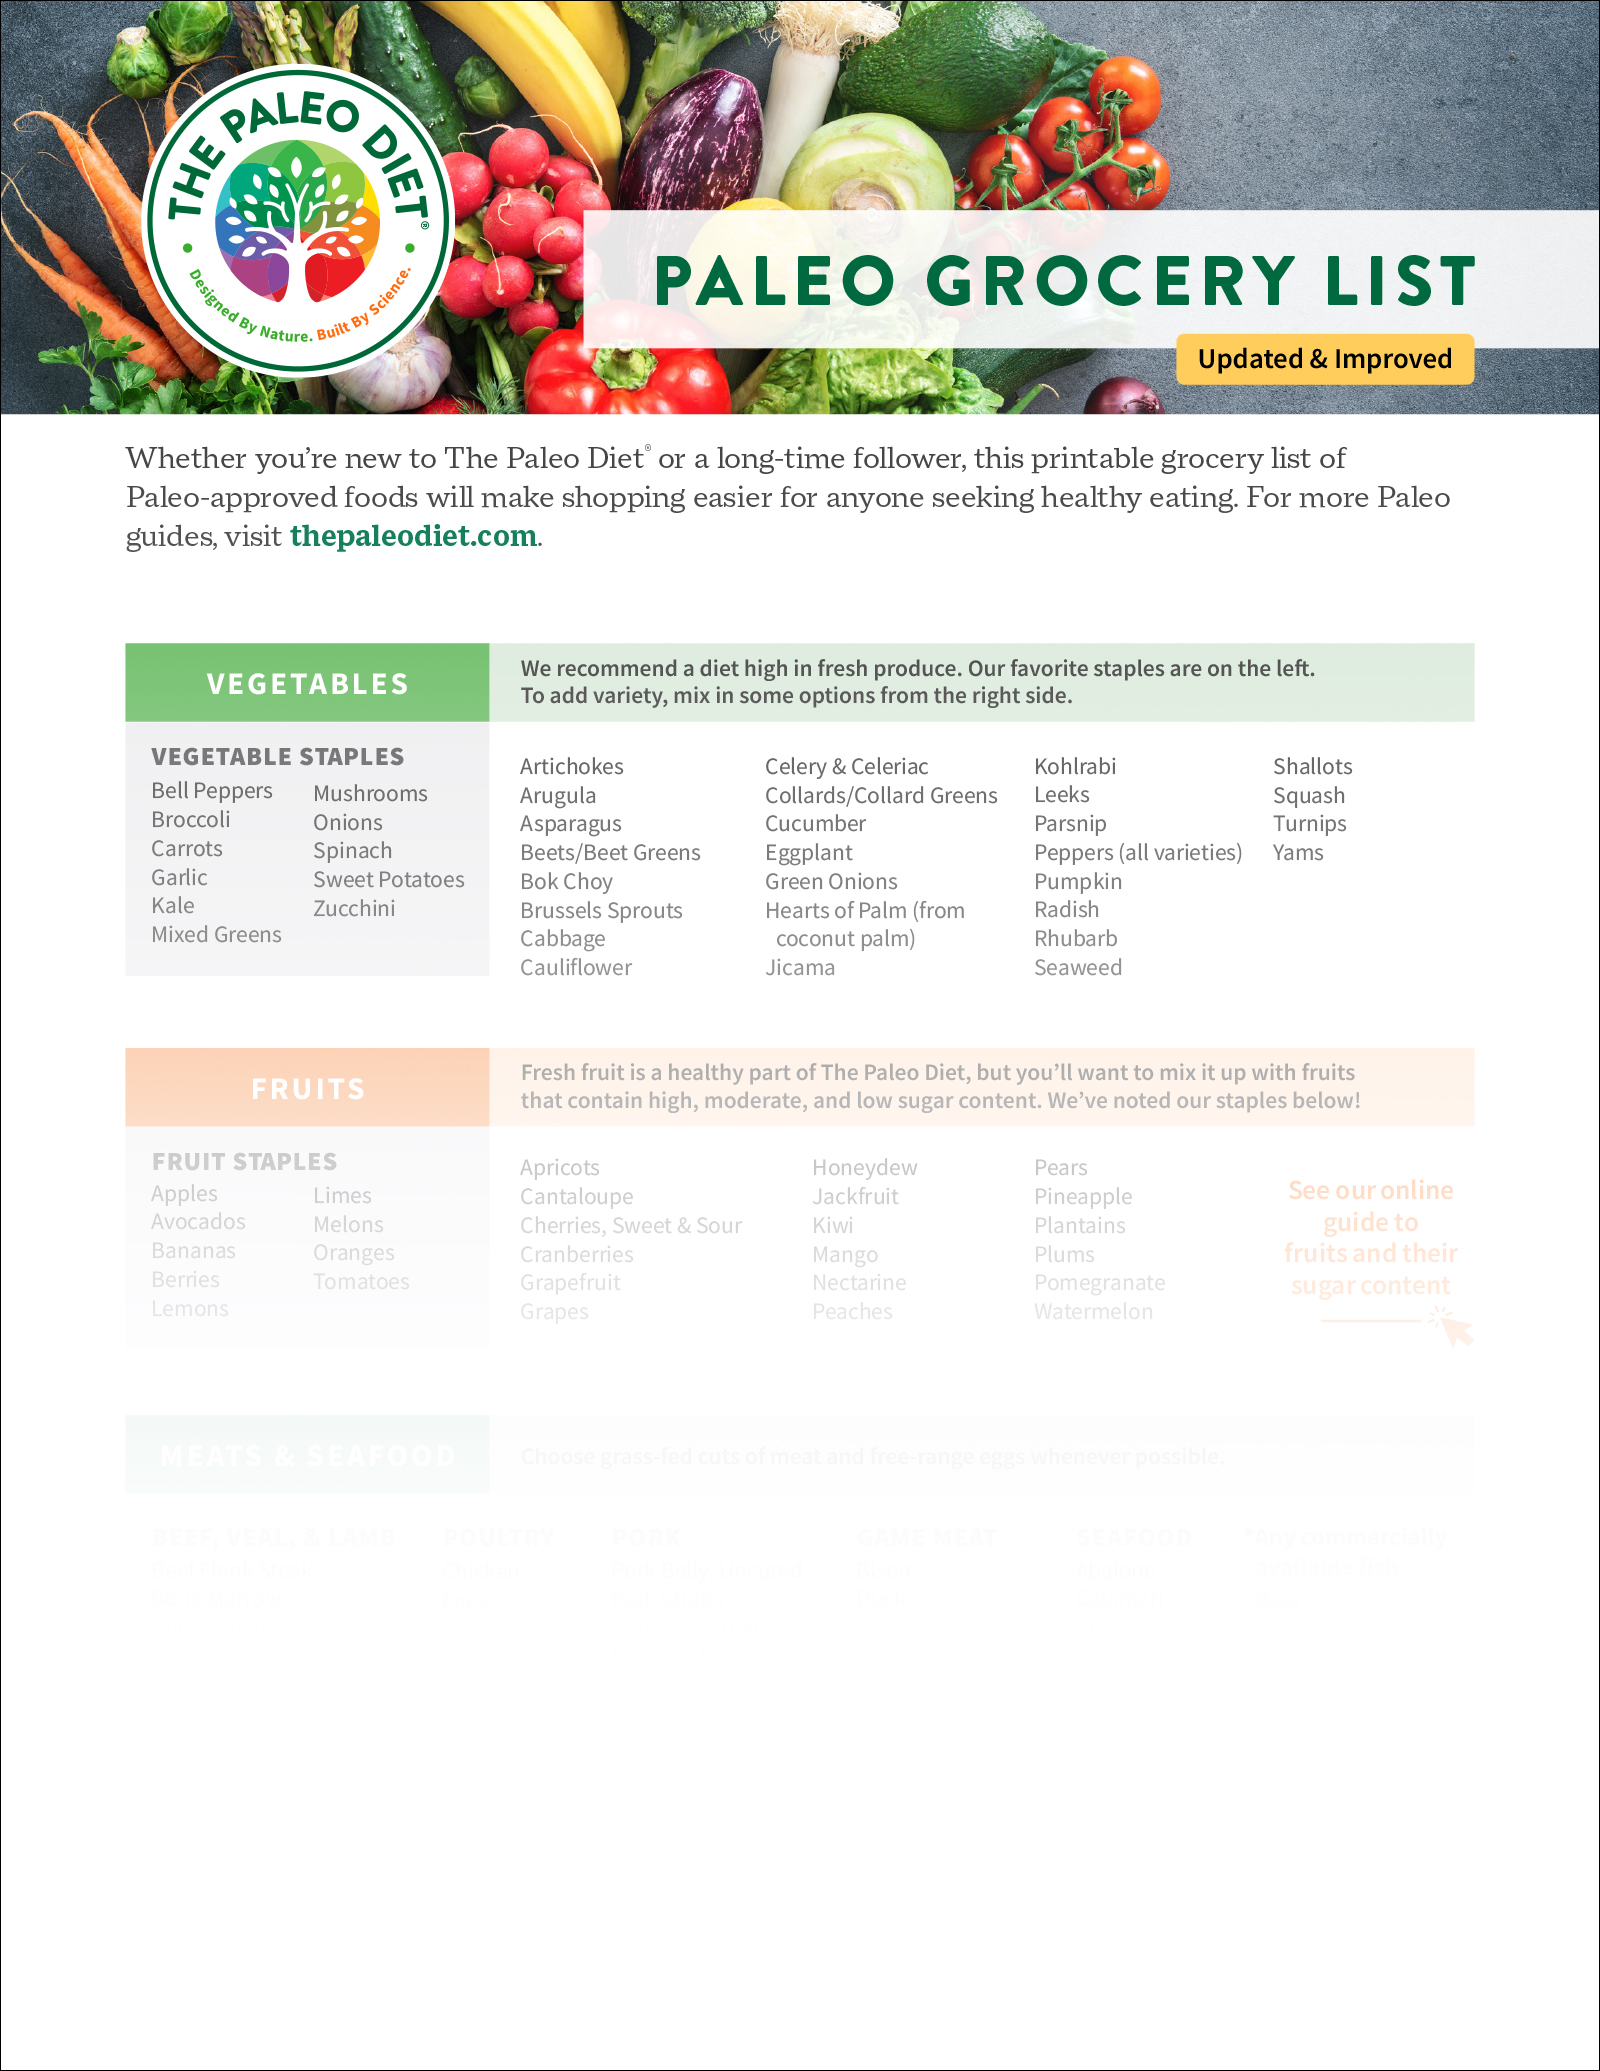 The Paleo Diet Official Paleo Grocery List is a shopping checklist of approved paleo foods